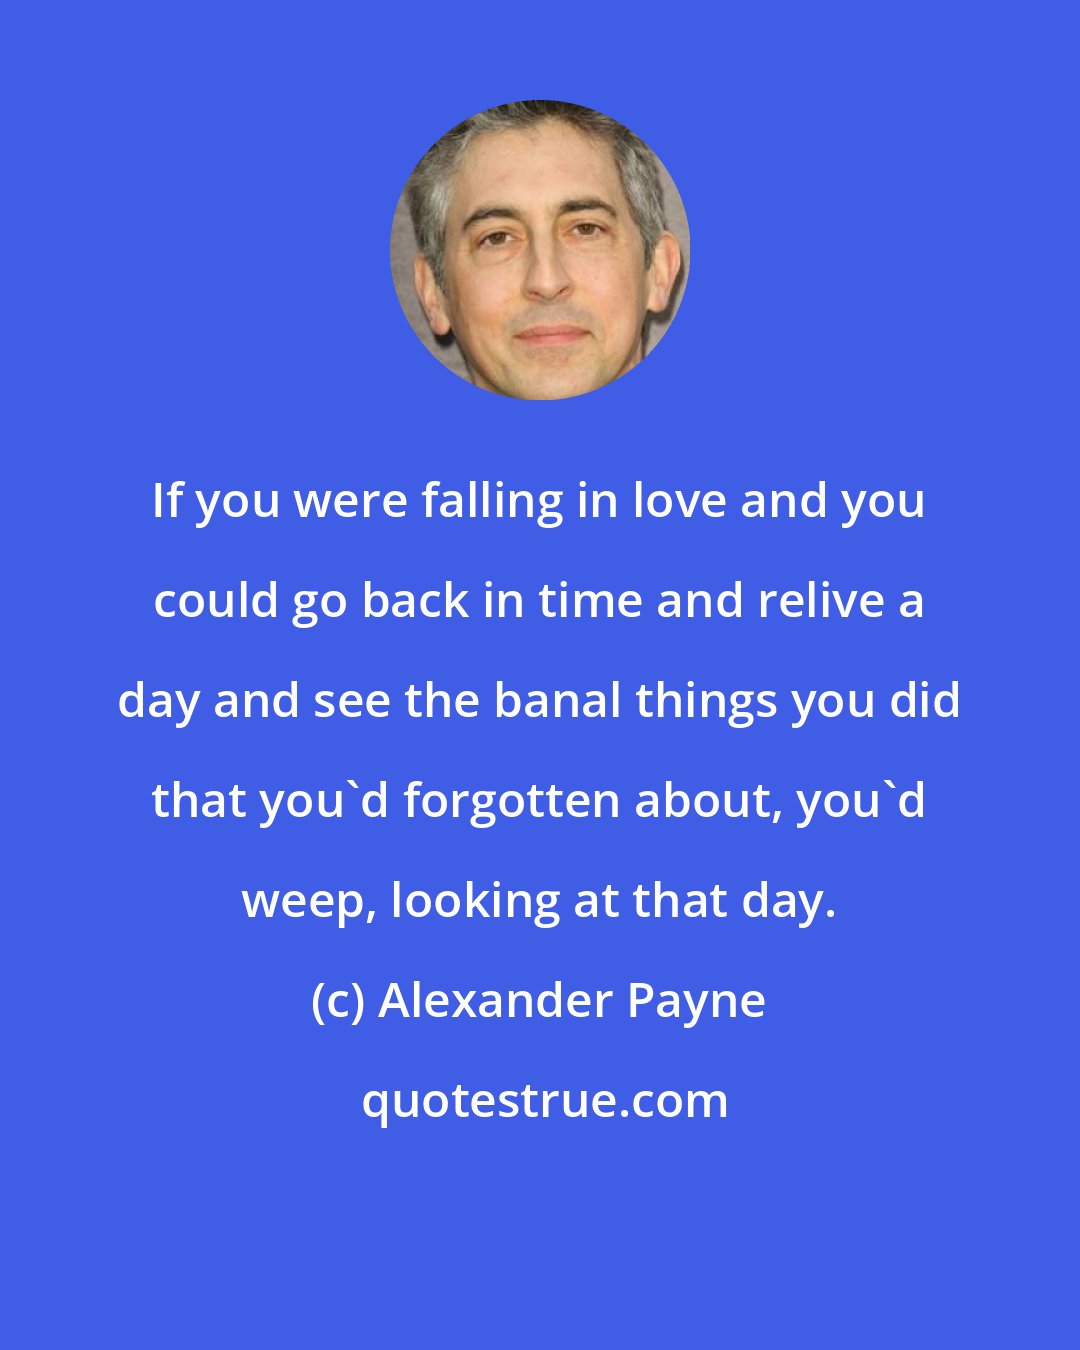 Alexander Payne: If you were falling in love and you could go back in time and relive a day and see the banal things you did that you'd forgotten about, you'd weep, looking at that day.